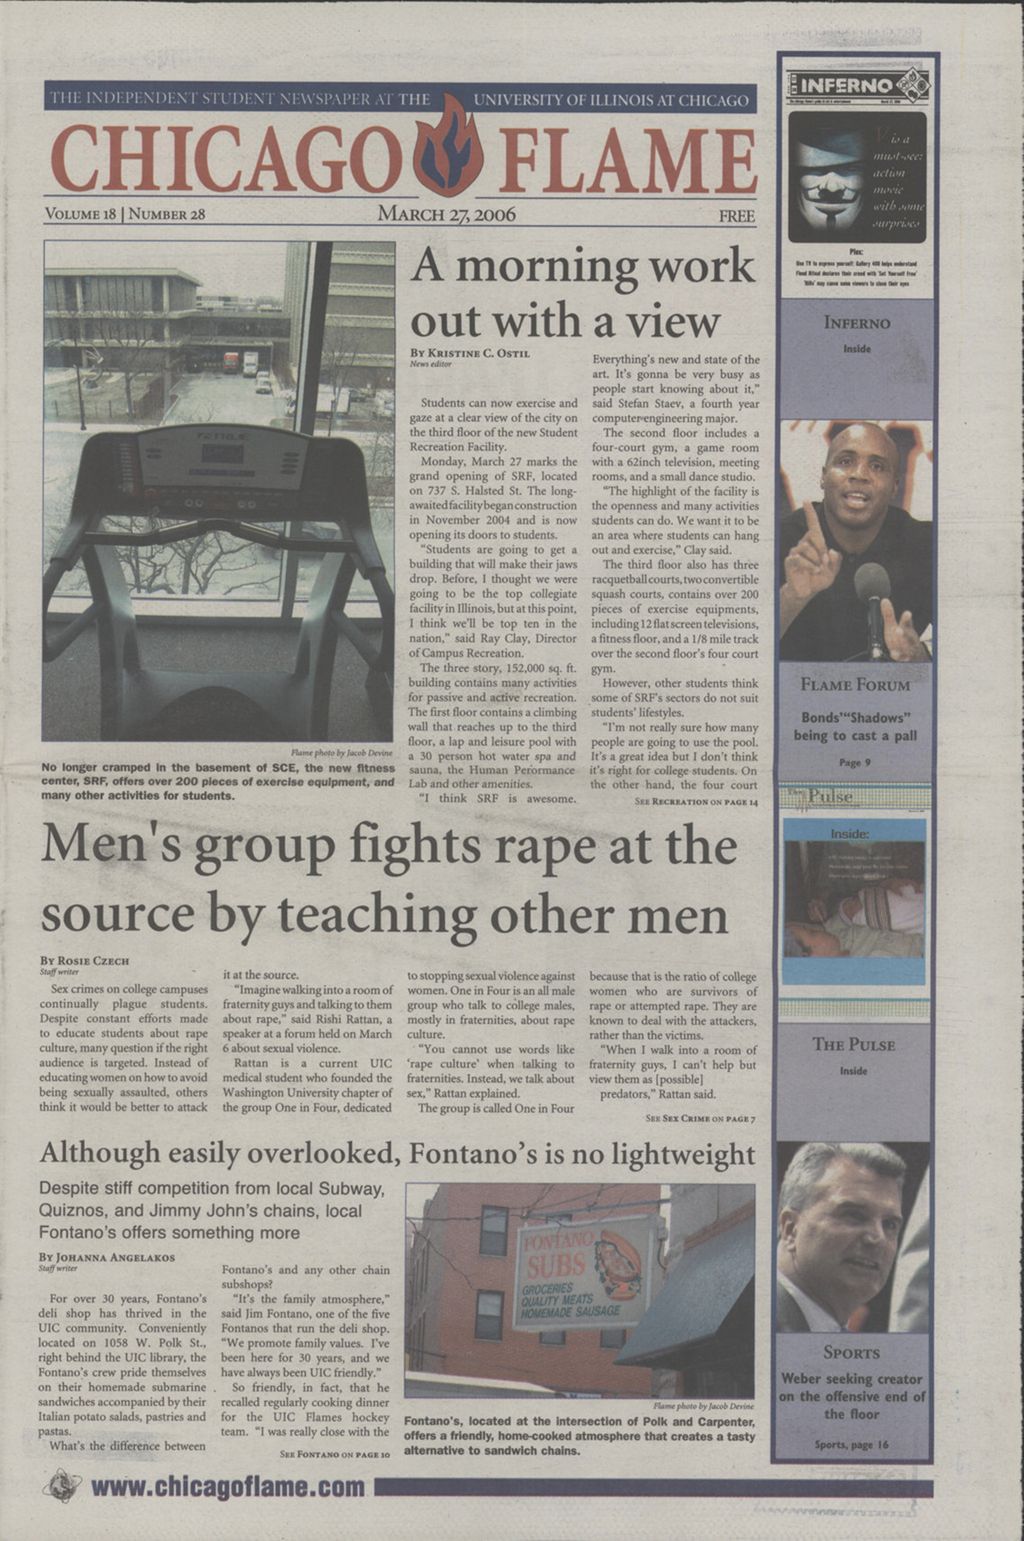 Chicago Flame (March 27, 2006)